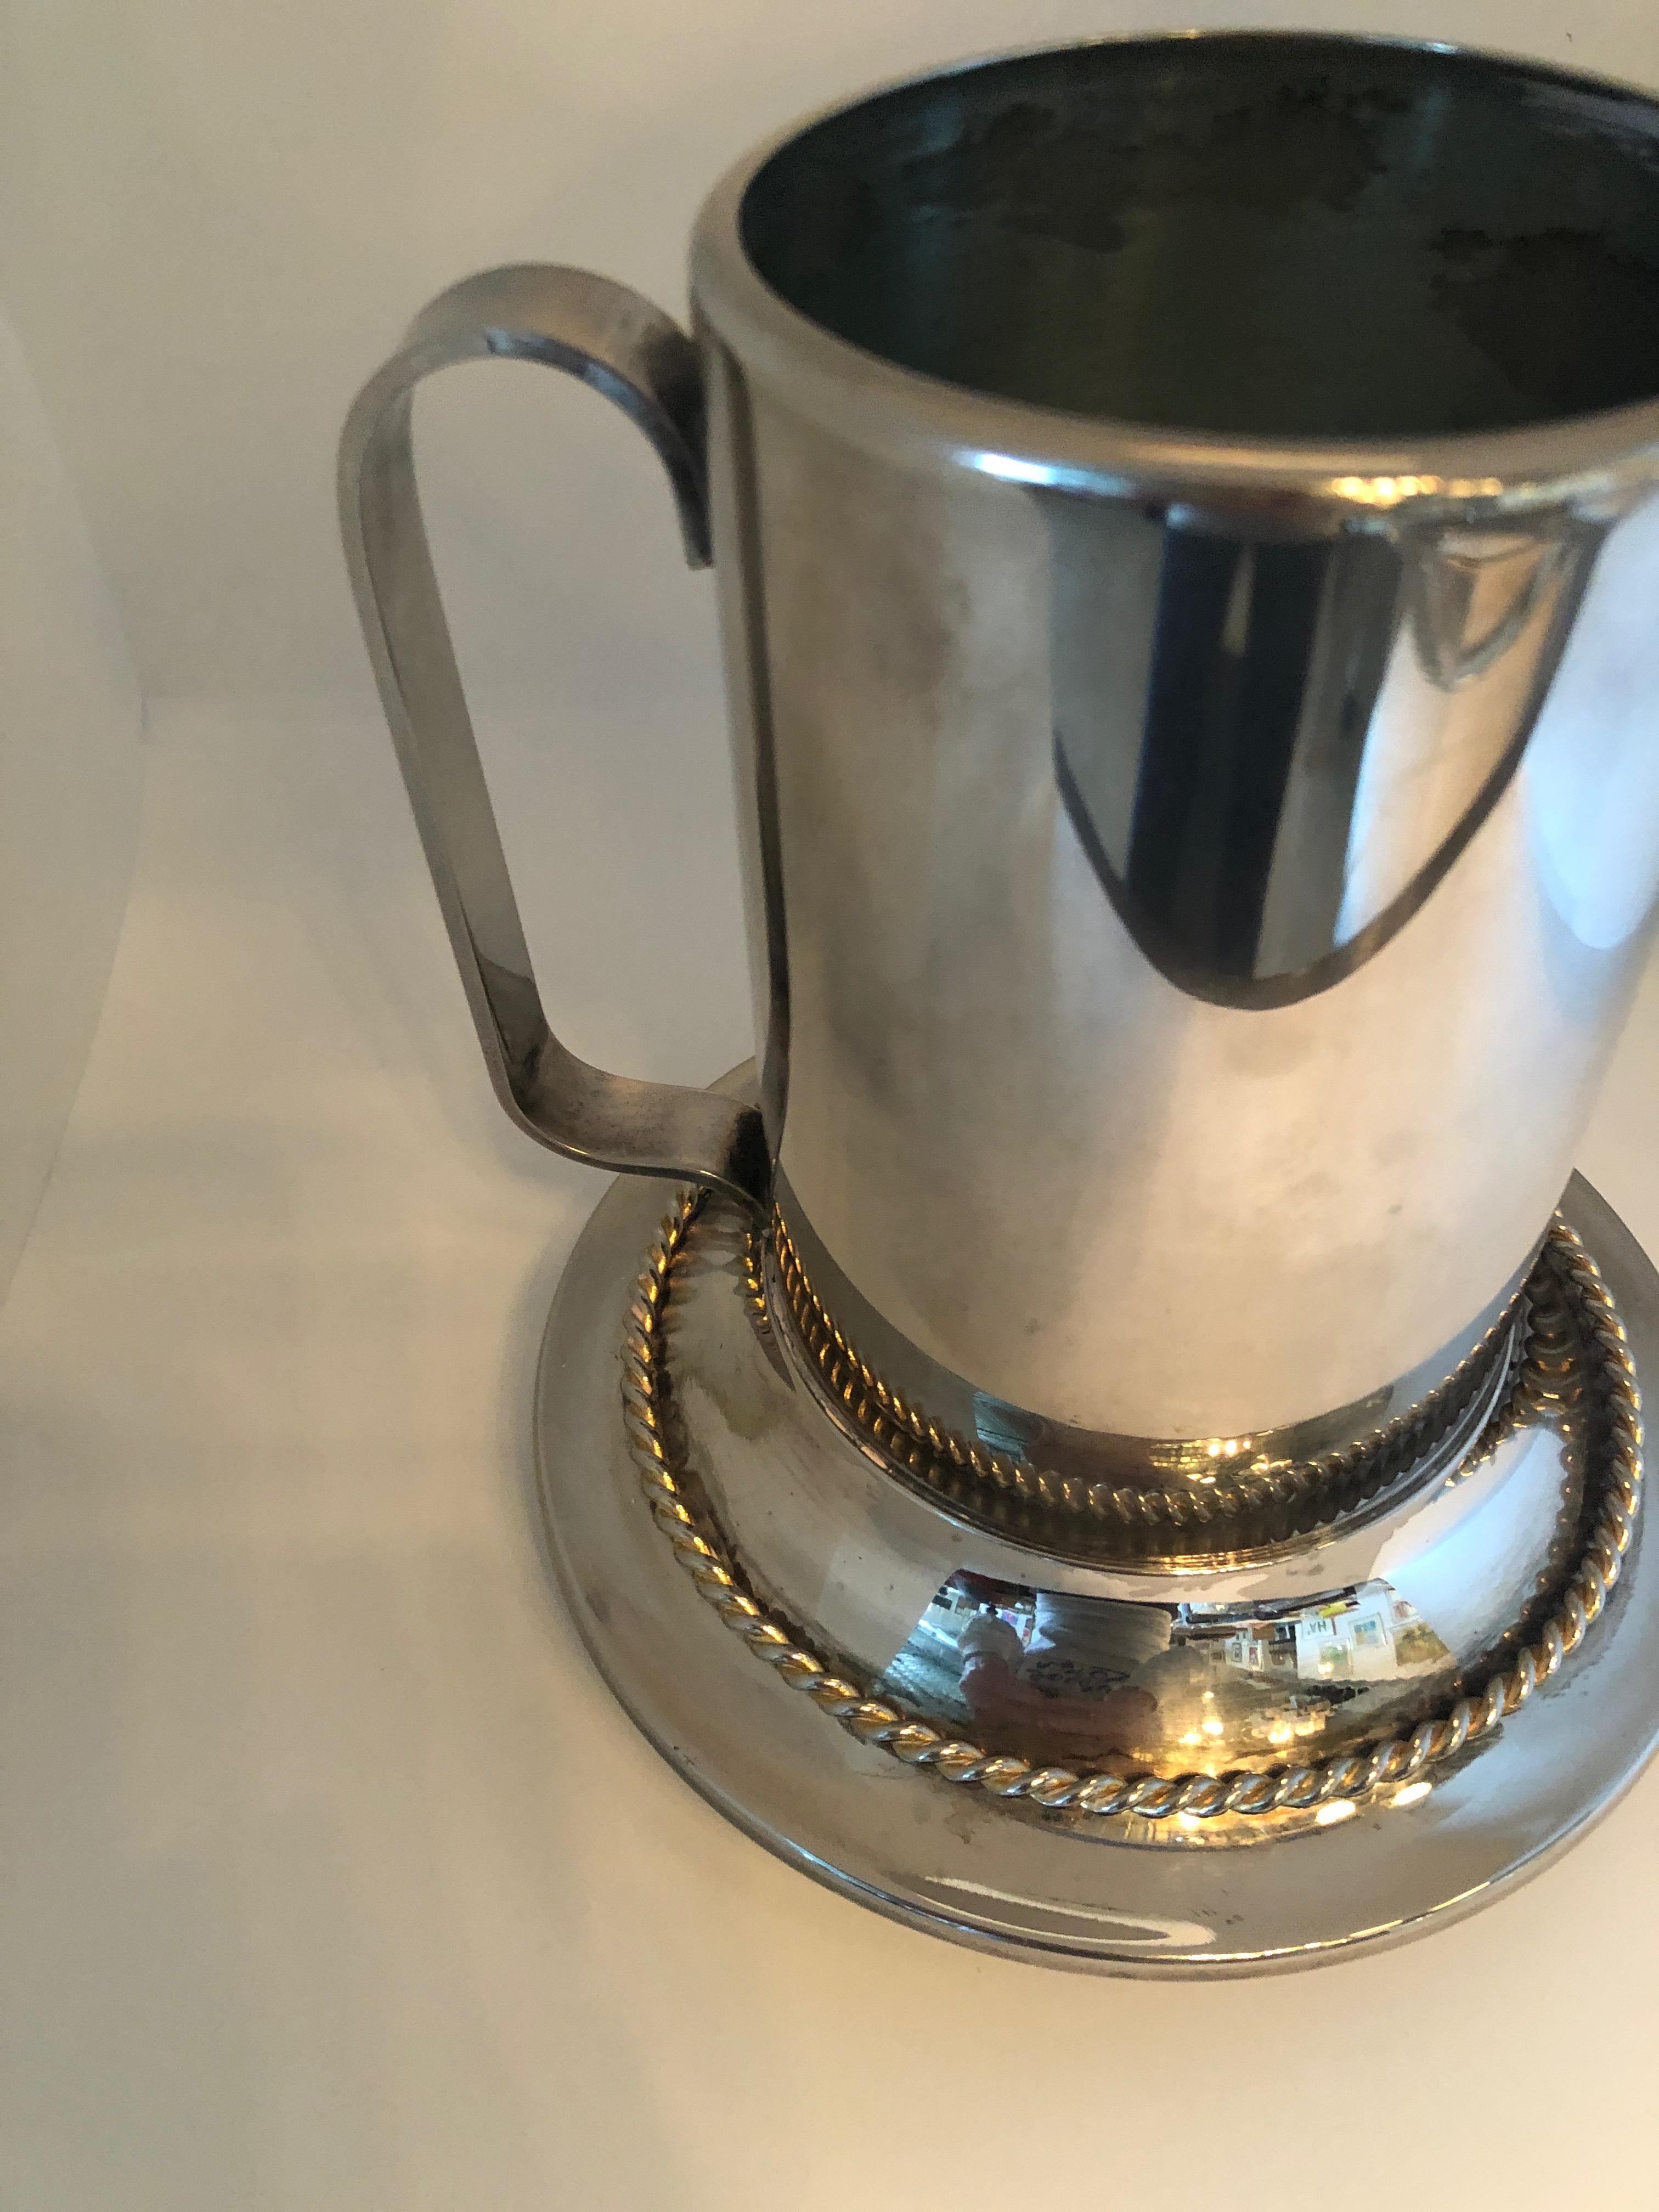 Gucci Glass Encased in Silver-Plate Nautical Martini Pitcher and Long Spoon In Good Condition For Sale In Houston, TX